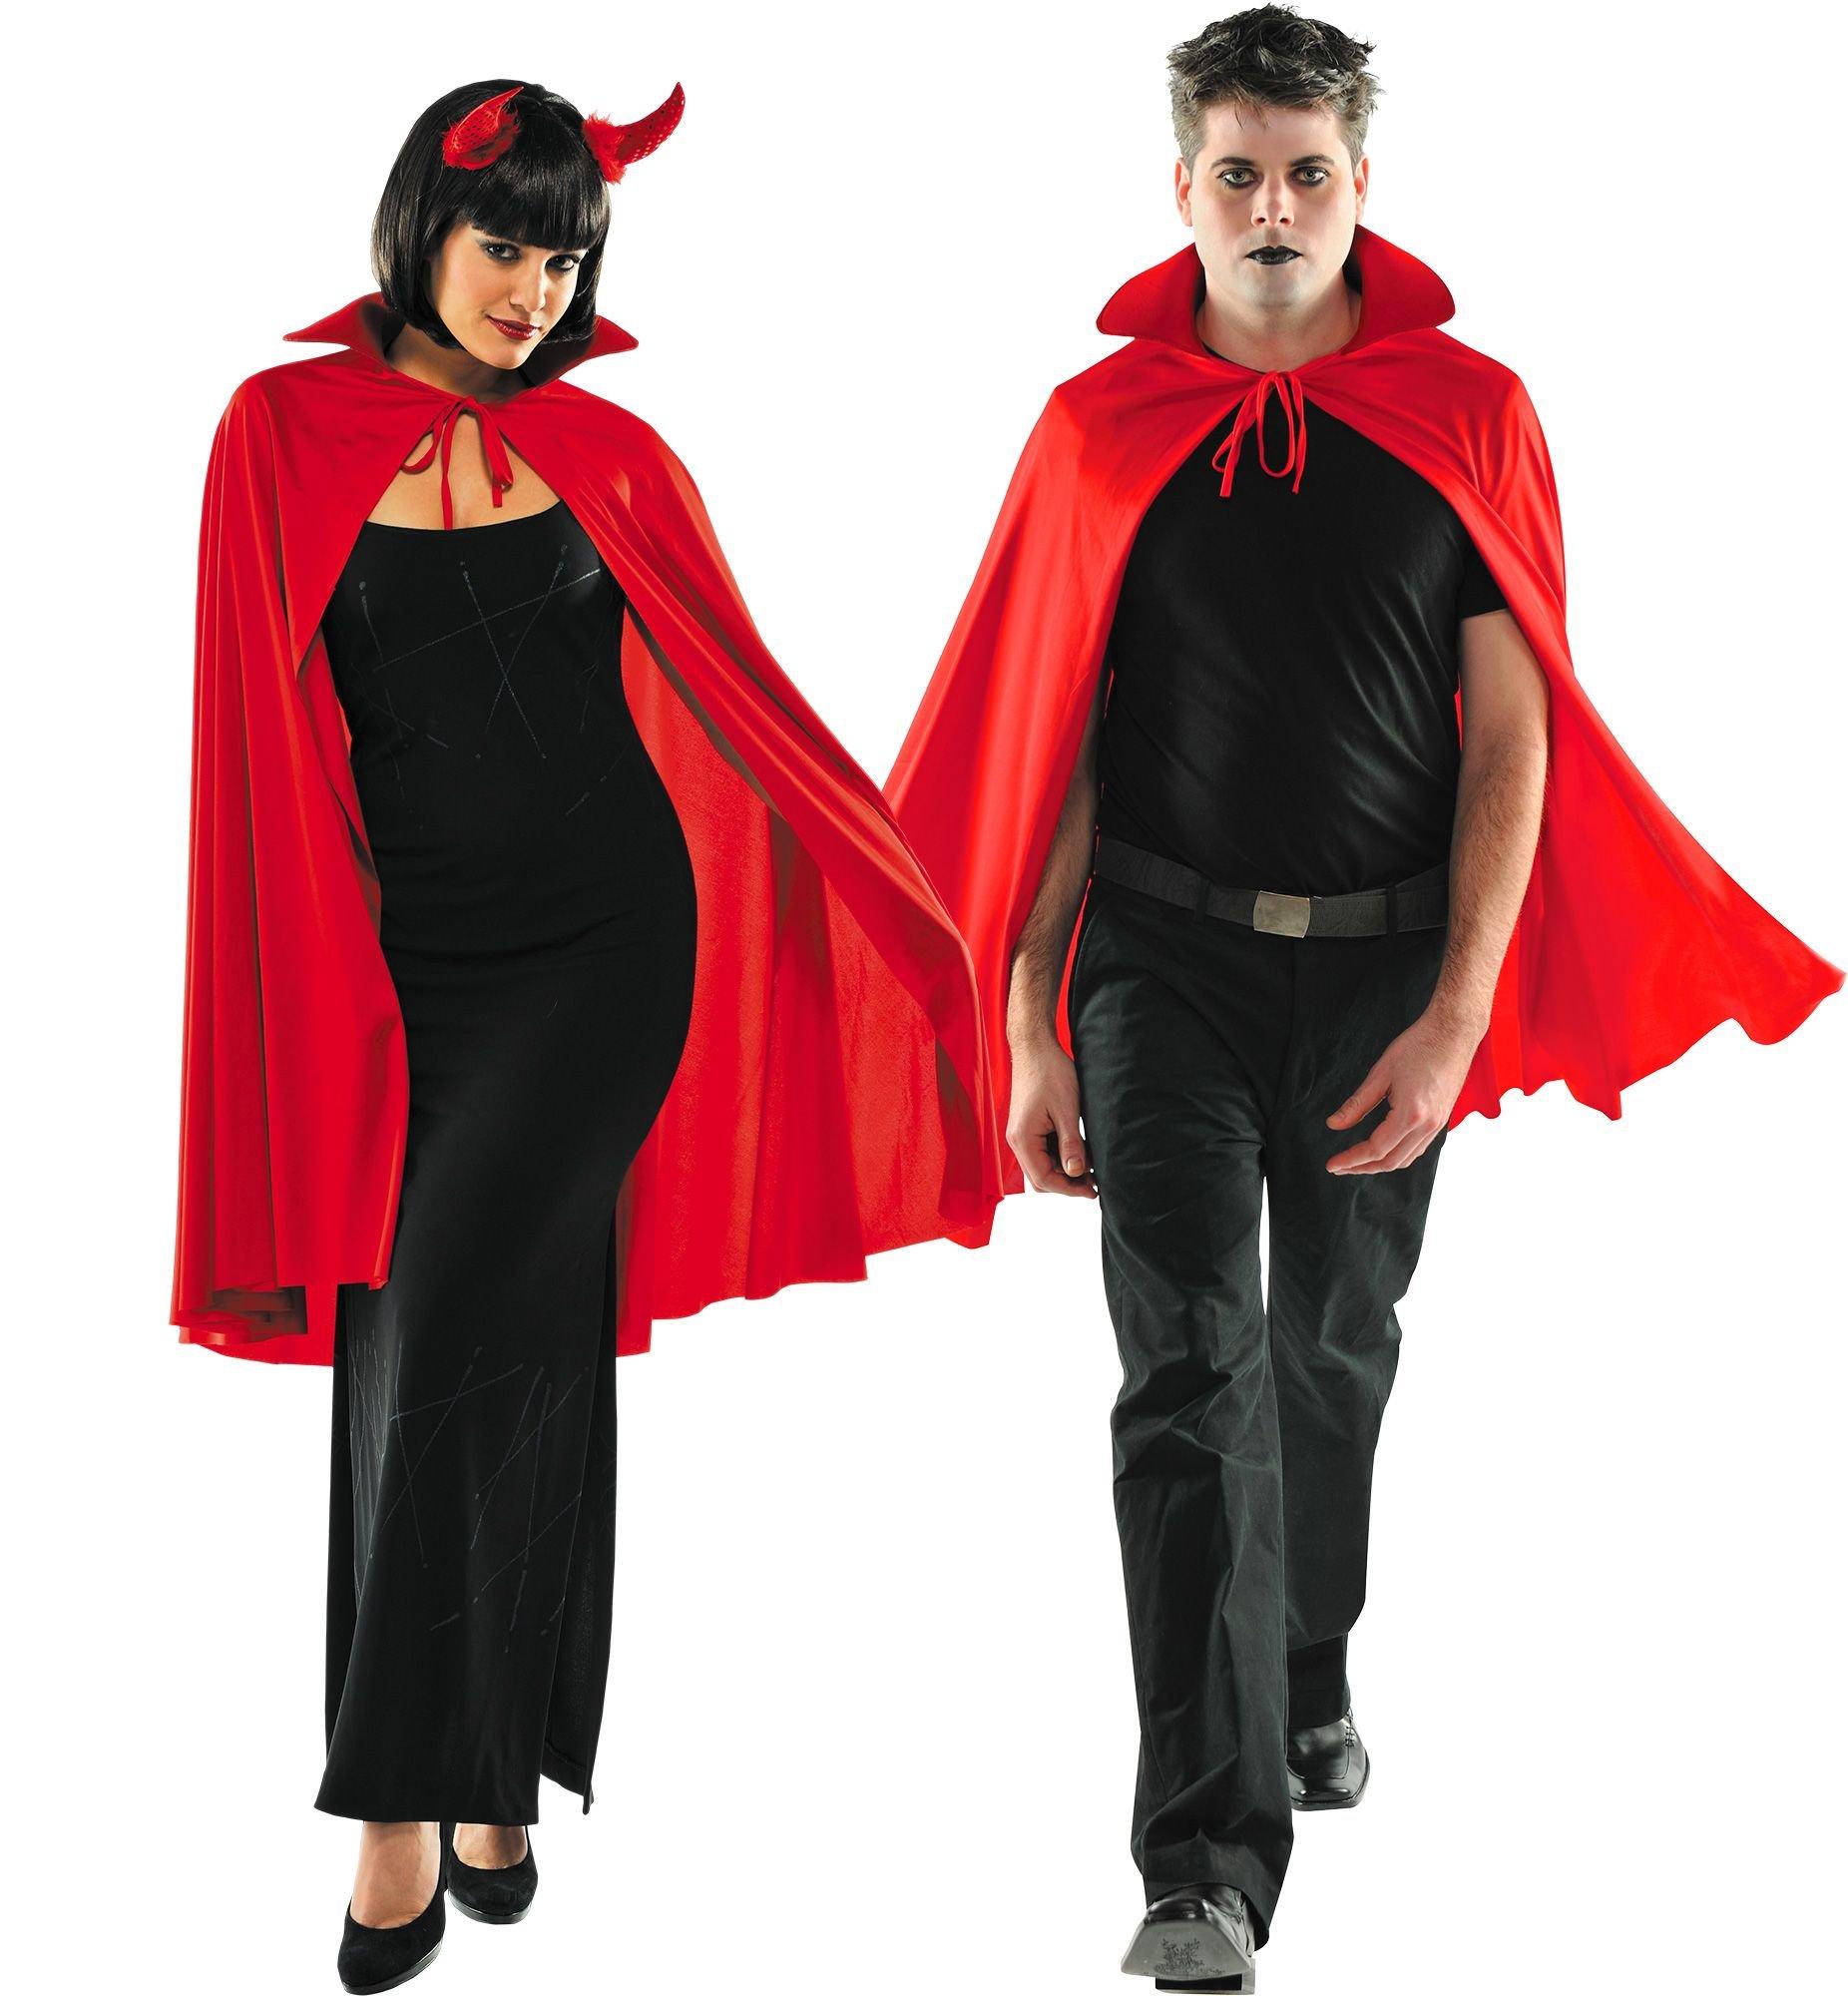 Adult M&Ms Deluxe Red Character Costume - In Stock : About Costume Shop